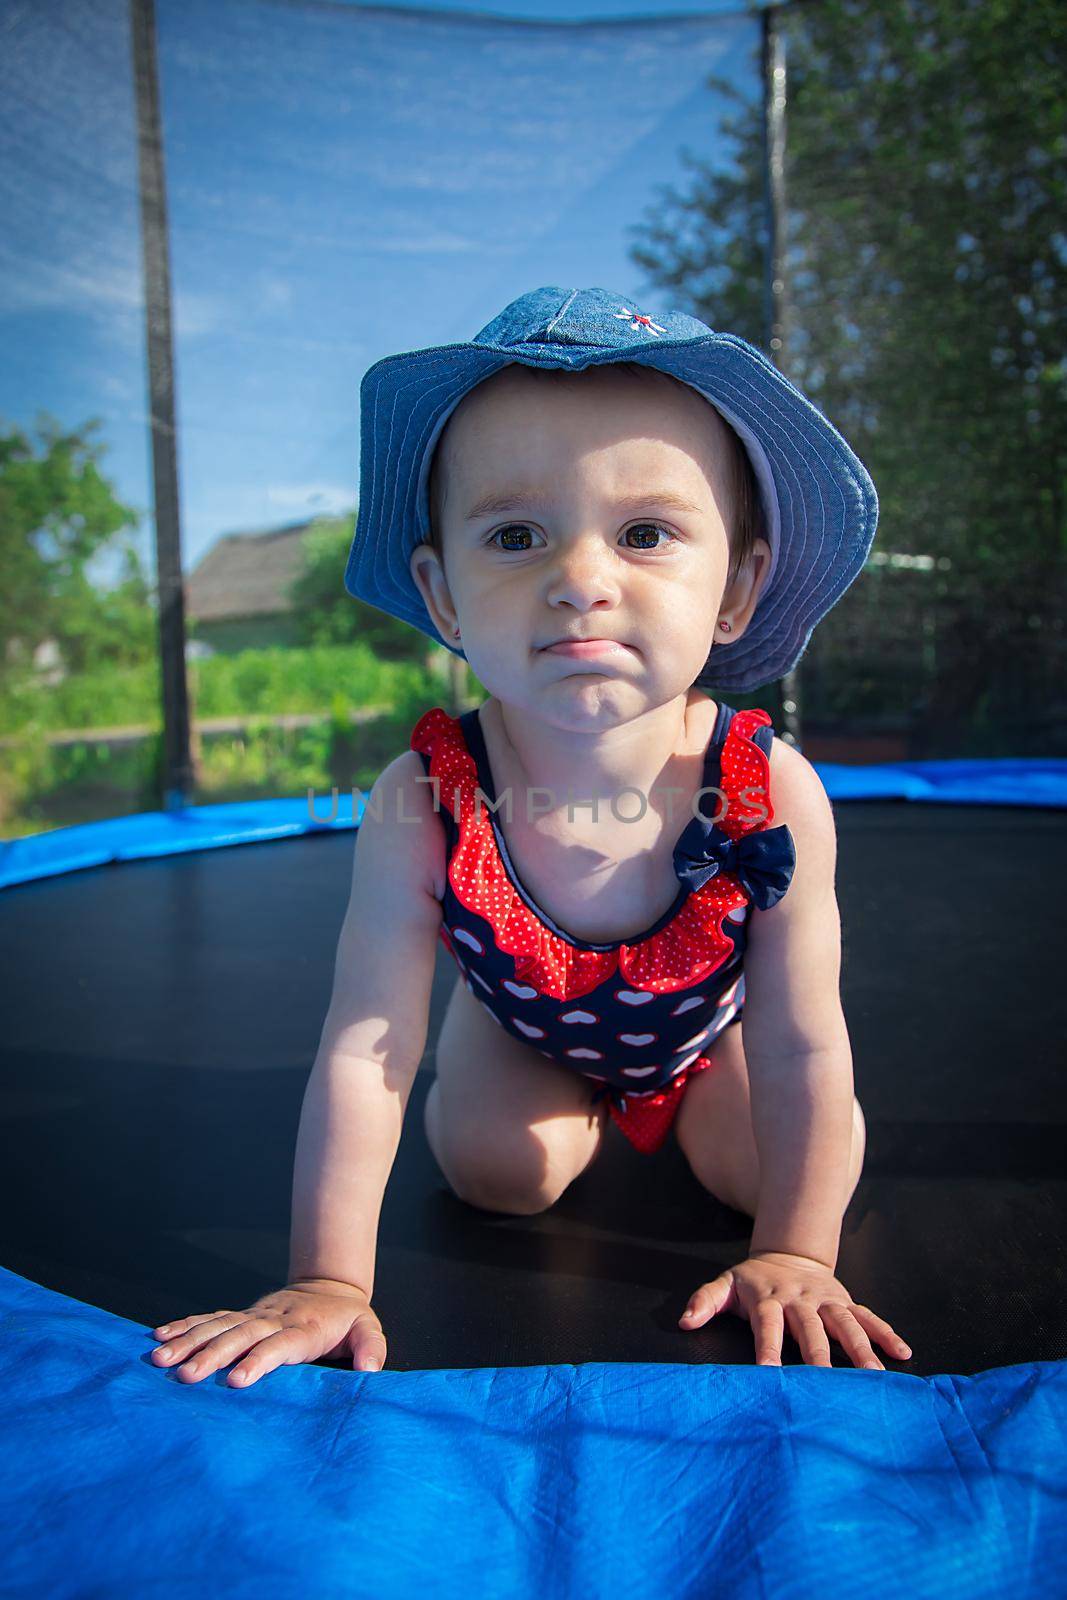 A small child posing on a trampoline